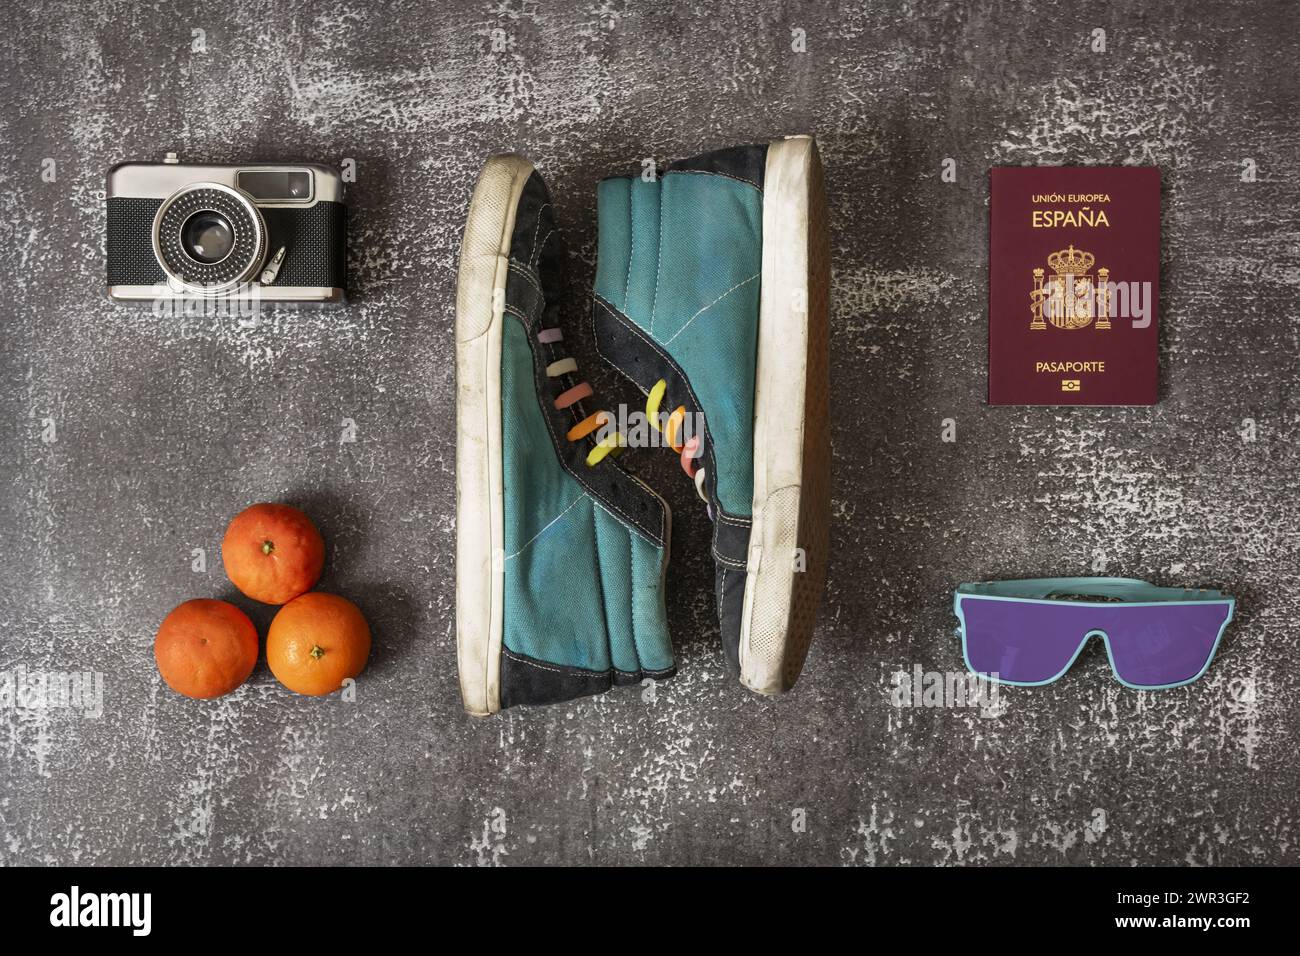 used sports ankle boots with rainbow laces along with an old photo camera, tangerines, Spanish passport and sunglasses on gray surface Stock Photo